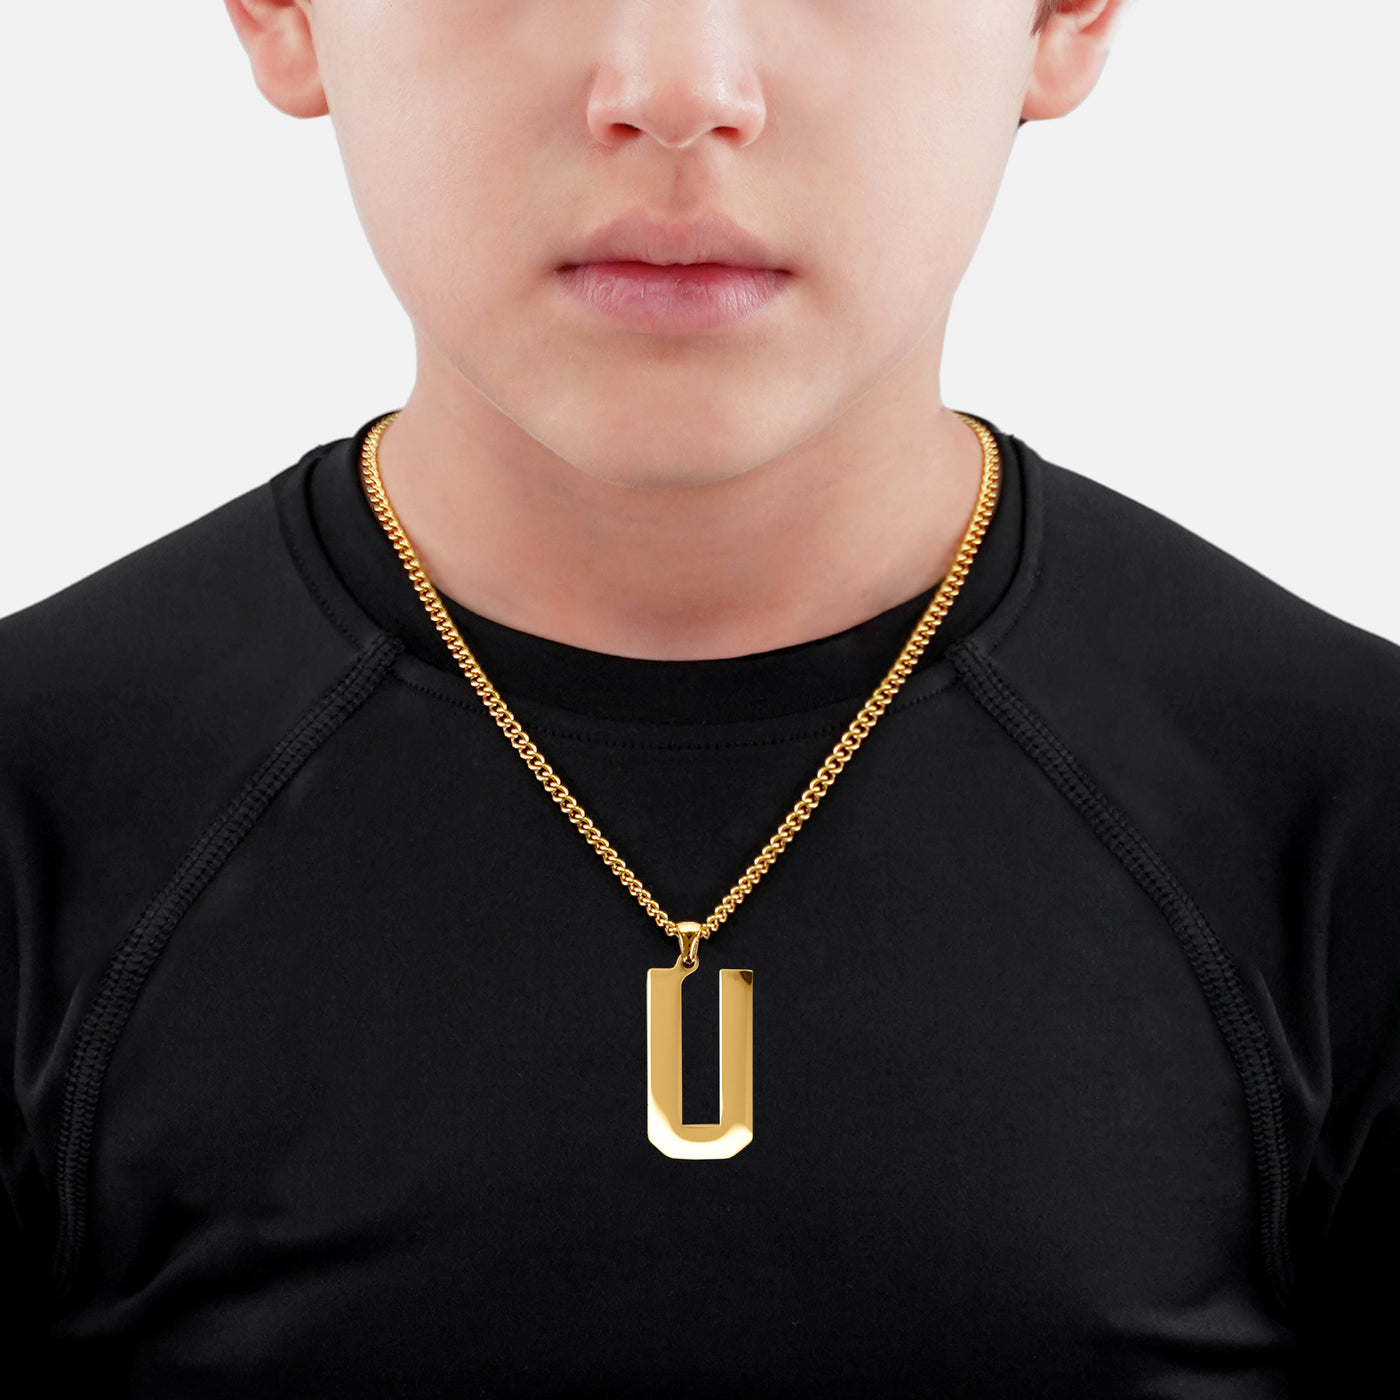 U Letter Pendant with Chain Kids Necklace - Gold Plated Stainless Steel